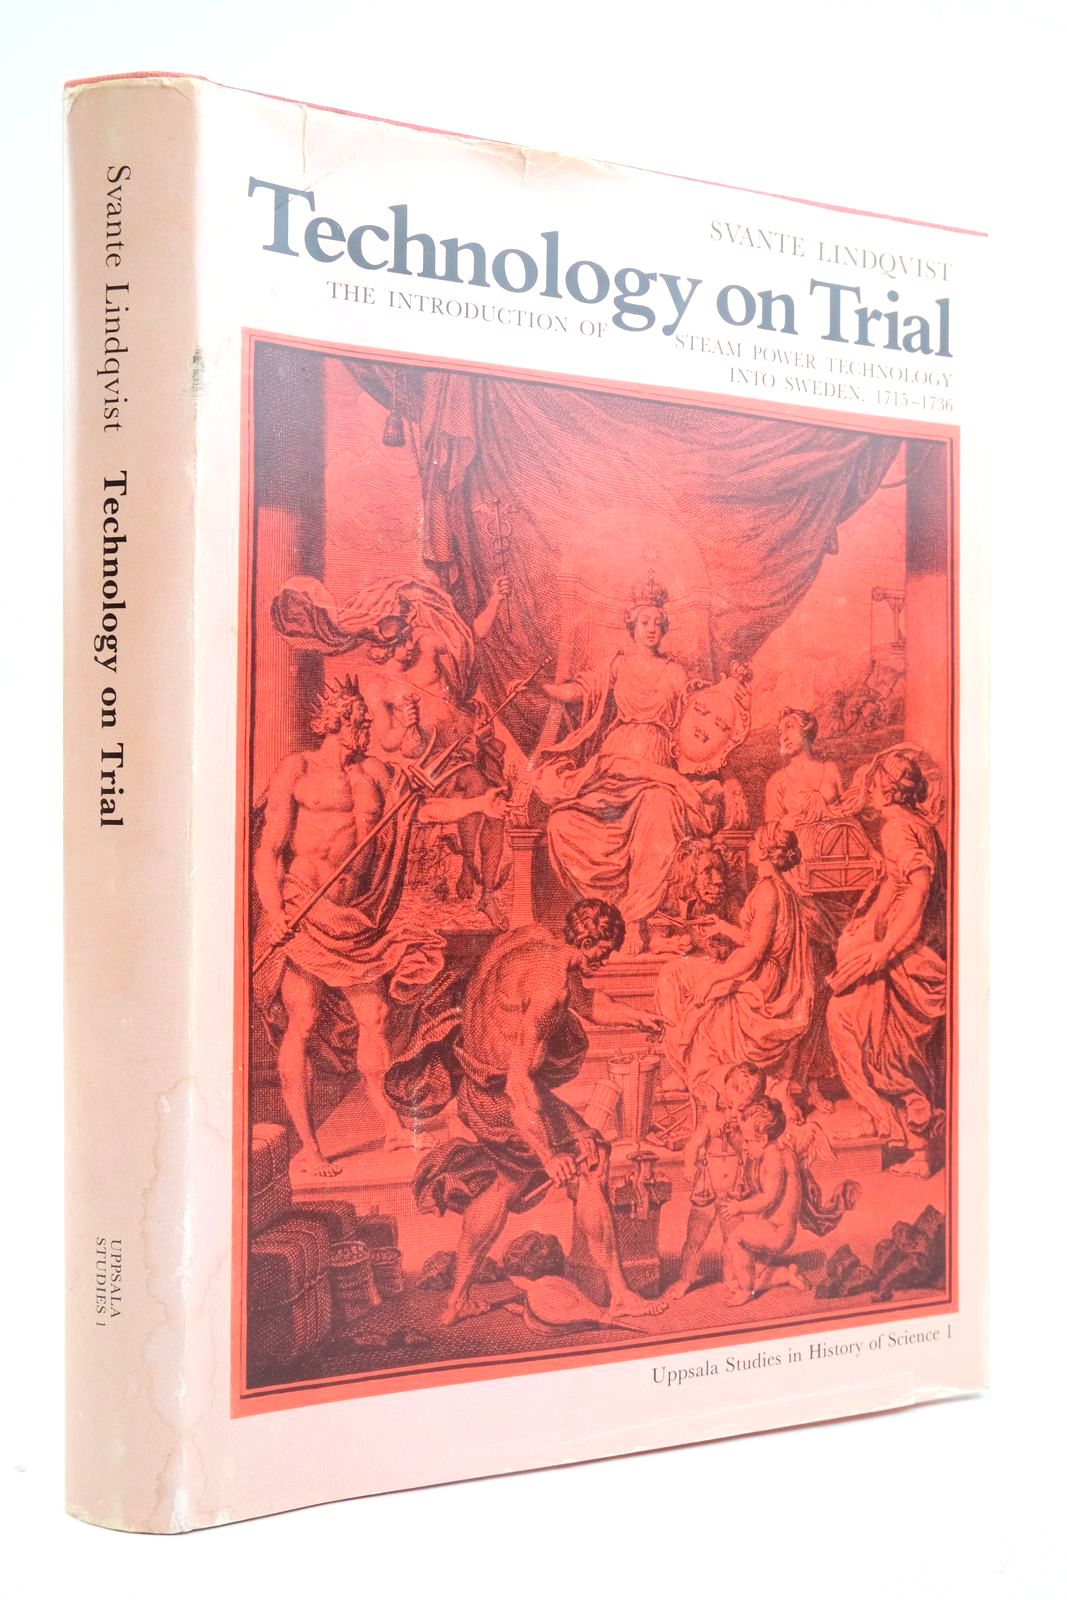 Photo of TECHNOLOGY ON TRIAL: THE INTRODUCTION OF STEAM POWER TECHNOLOGY INTO SWEDEN. 1715-1736 written by Lindqvist, Svante published by Almquist &amp; Wiksells, Uppsala (STOCK CODE: 2136119)  for sale by Stella & Rose's Books